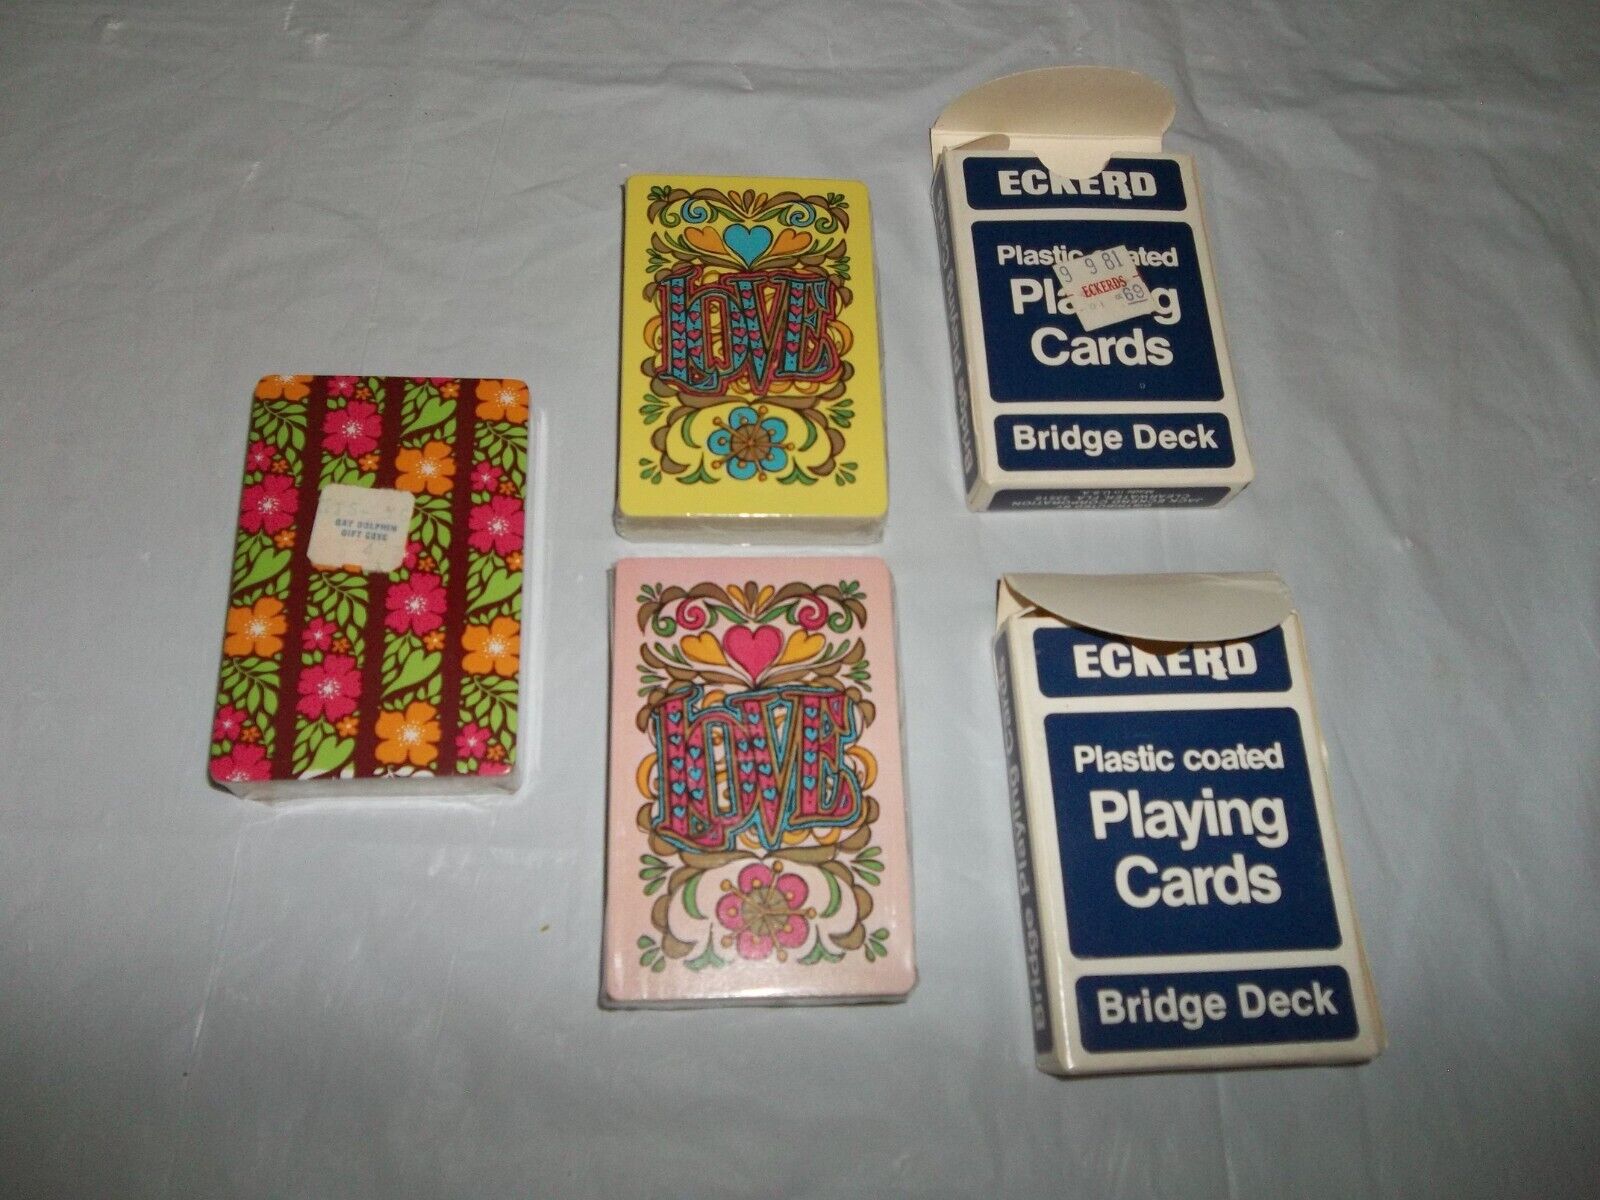 Vintage Eckerd Plastic-coated Bridge Playing Cards~ Never used ~Still in plastic